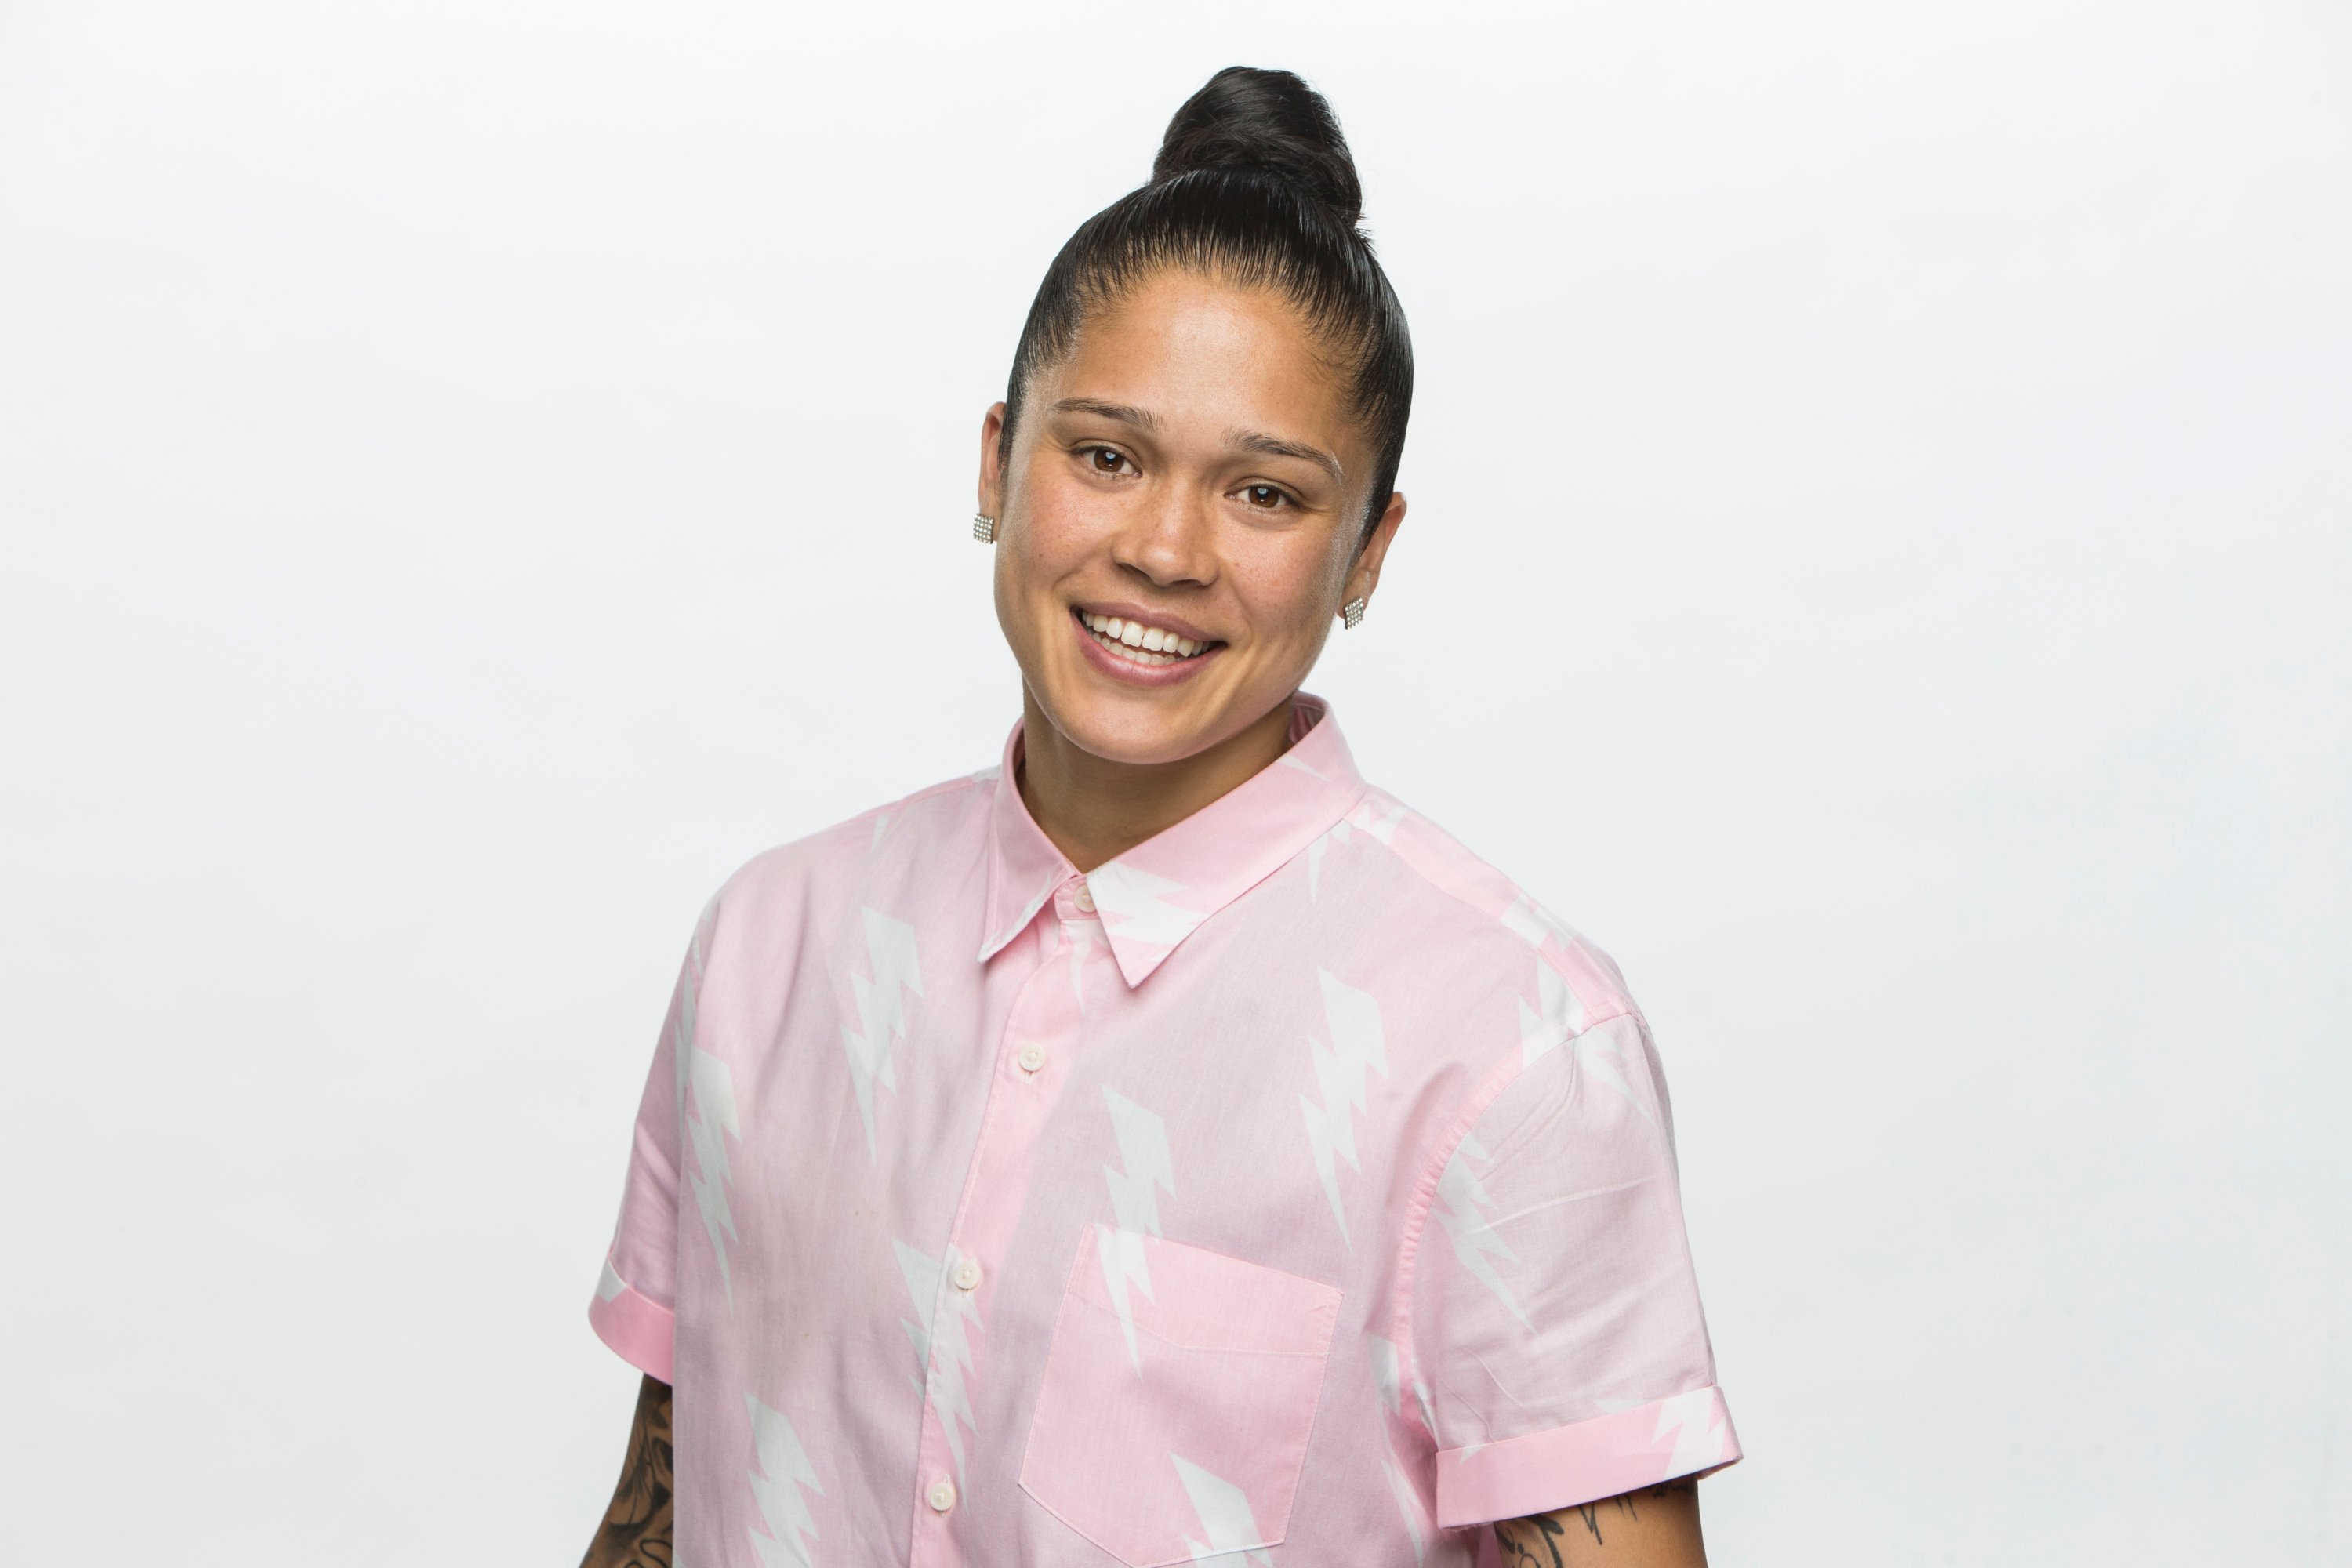 Kaycee Clark posing for 'Big Brother 20' cast photo